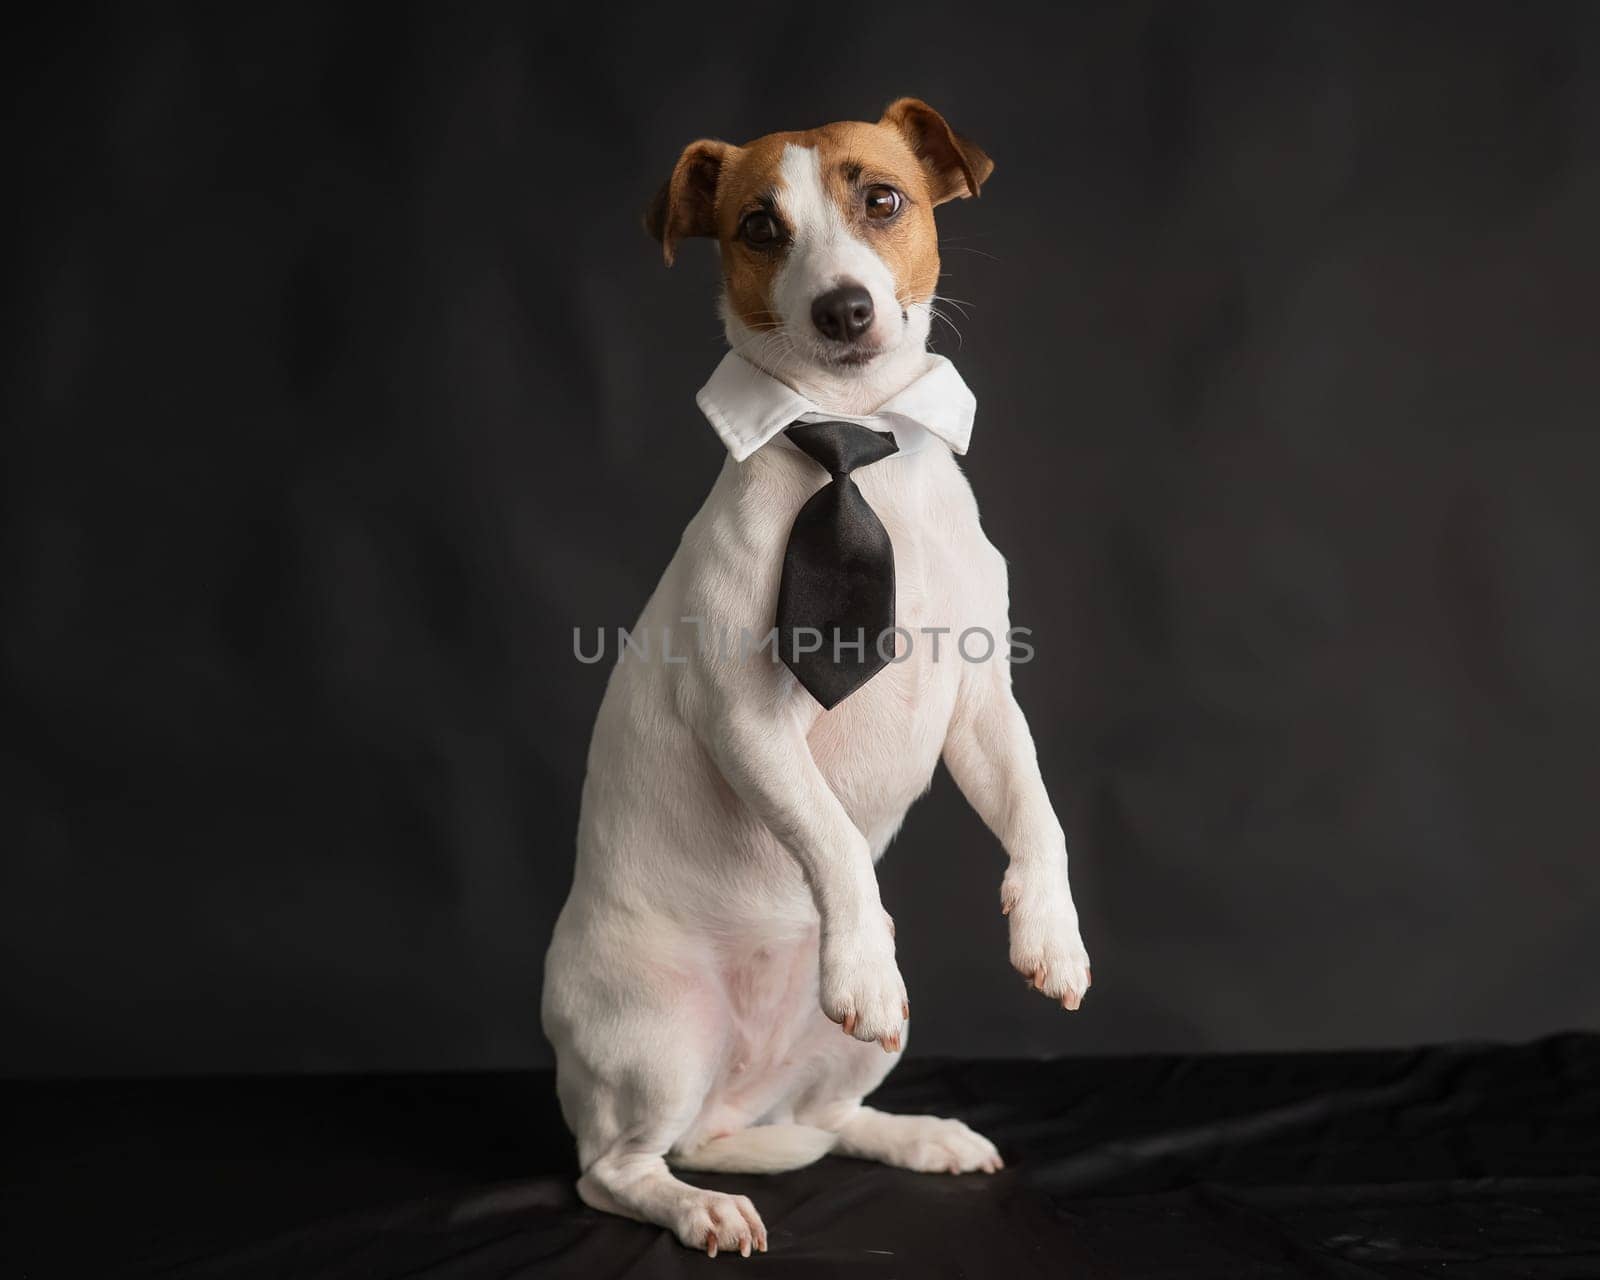 Jack Russell Terrier dog in a tie on a black background. Copy space. by mrwed54